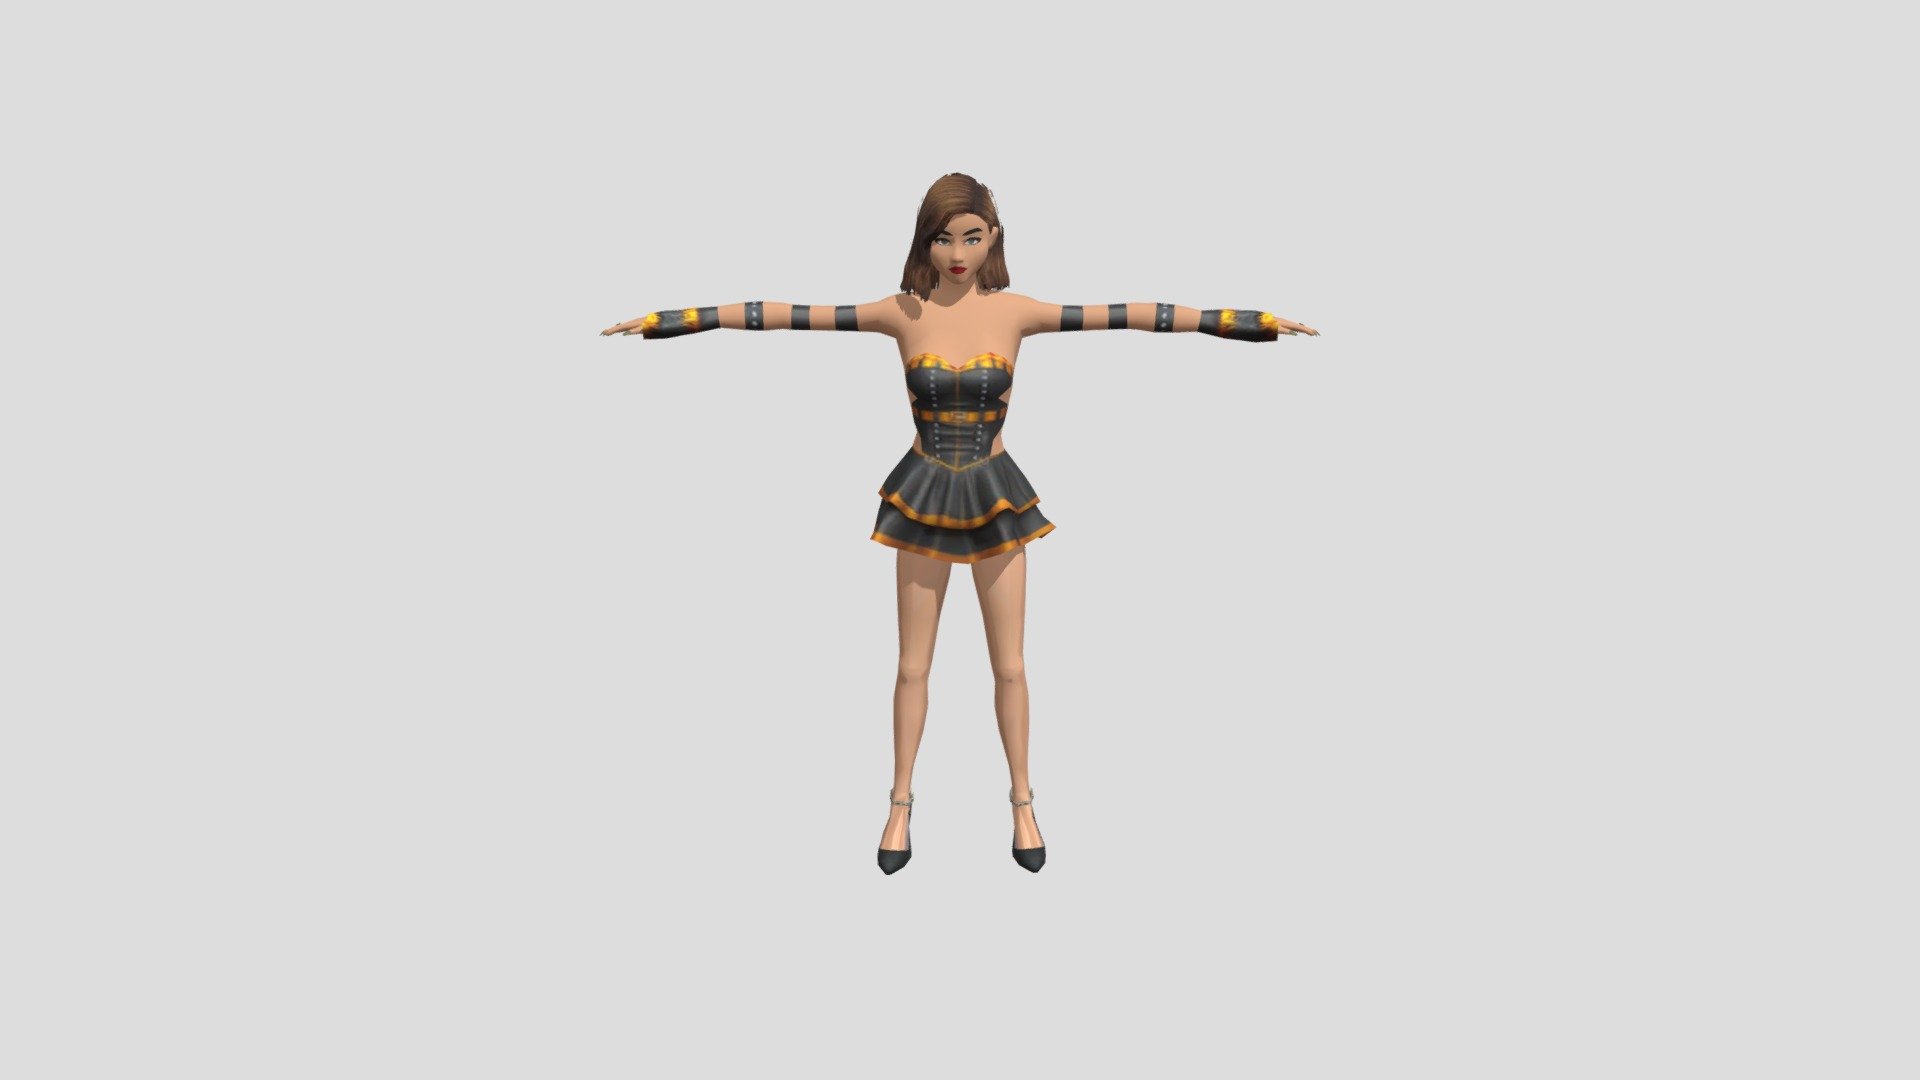 Asian Woman in Sportswear T Pose 3D Model $159 - .3ds .blend .c4d .fbx .max  .ma .lxo .obj .unitypackage .upk .gltf - Free3D, t pose fortnite -  thirstymag.com